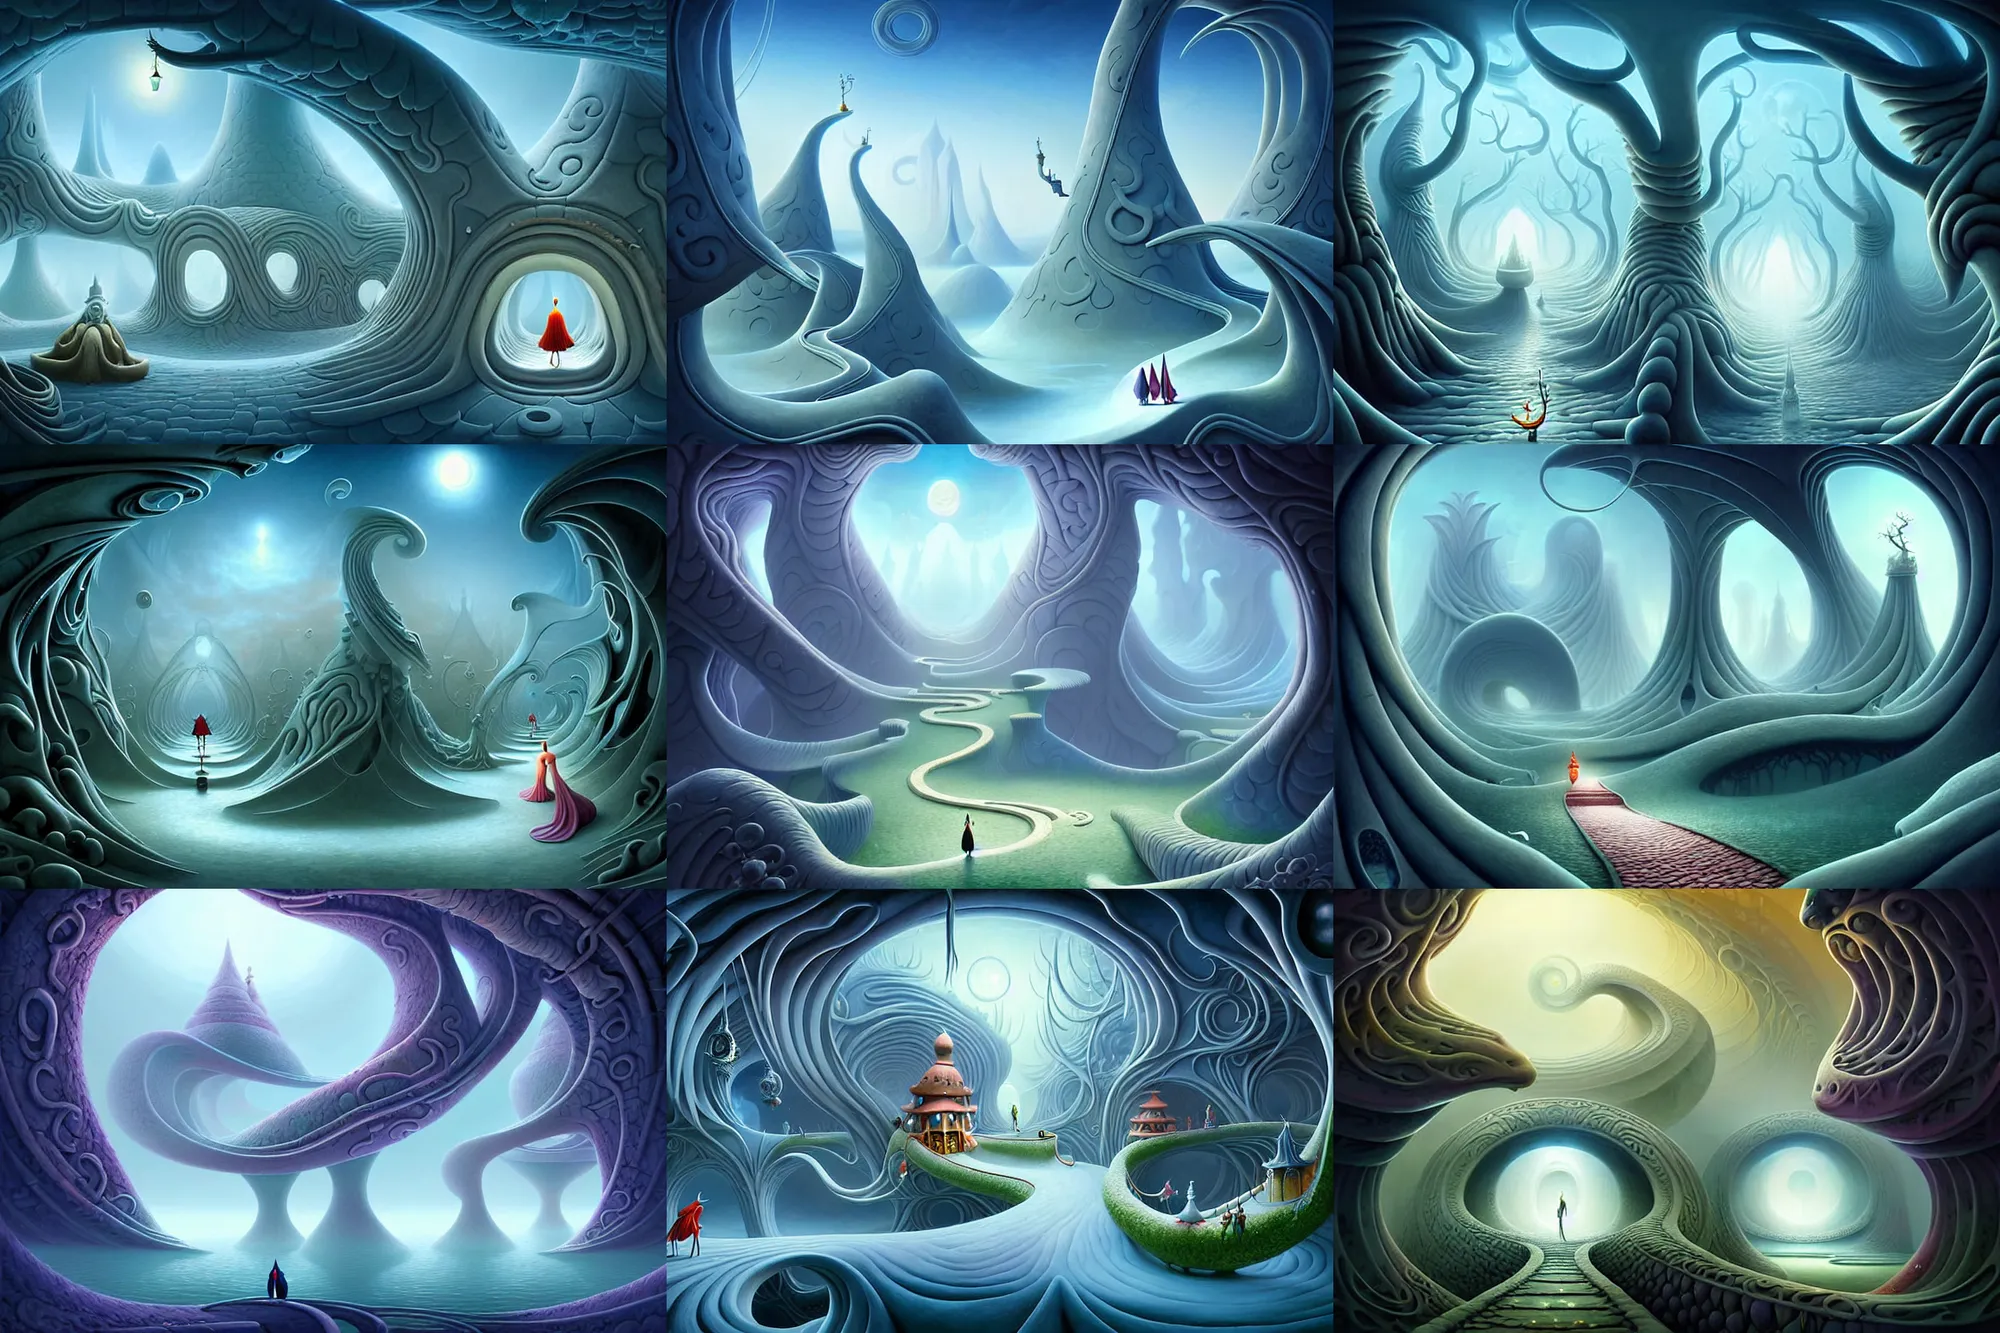 Prompt: a whimsical elite masterpiece mysterious science fantasy matte painting of a winding path through arctic dream worlds with surreal architecture designed by heironymous bosch, structures inspired by heironymous bosch's garden of earthly delights, surreal ice interiors by cyril rolando and natalie shau, insanely detailed and intricate, elegant, sense of awe